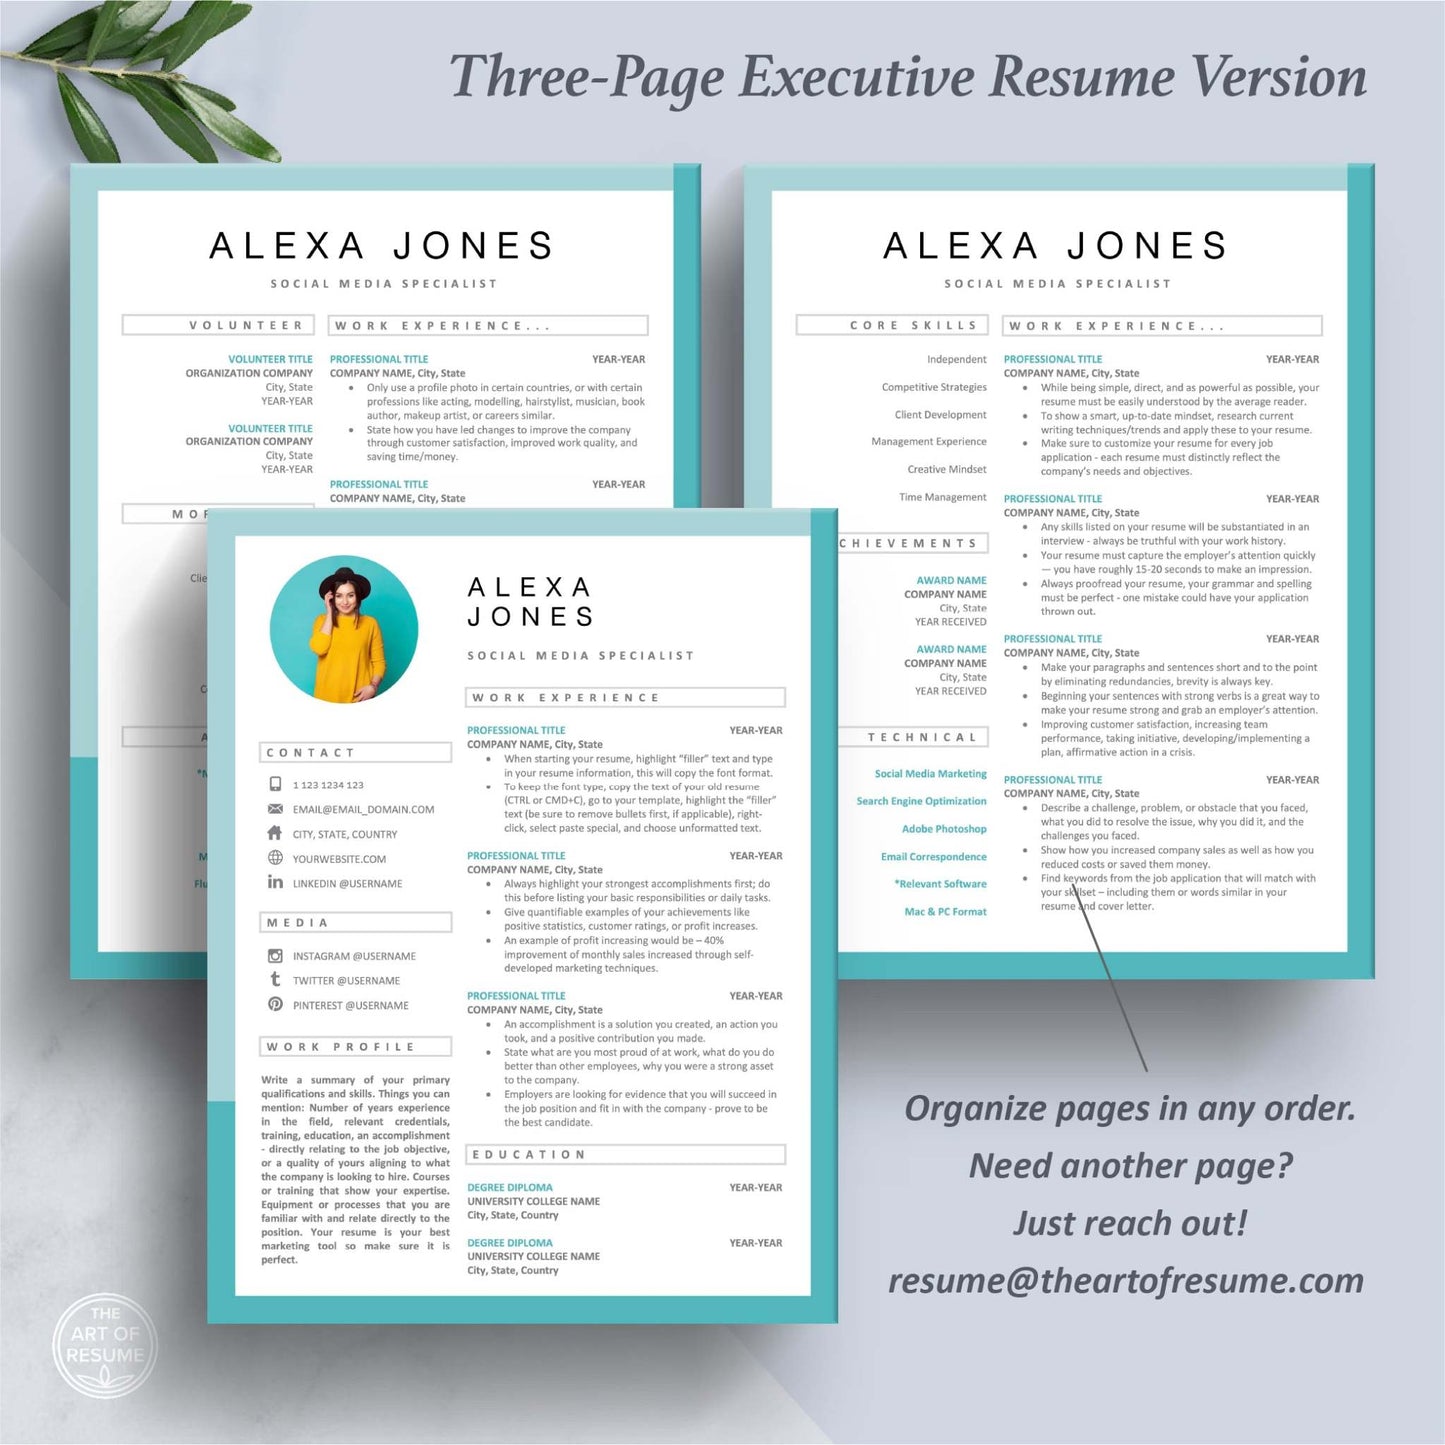 The Art of Resume Templates | Three-Page Executive CEO C-Suite Level Teal Blue Resume CV Design Template with Photo Picture | Curriculum Vitae